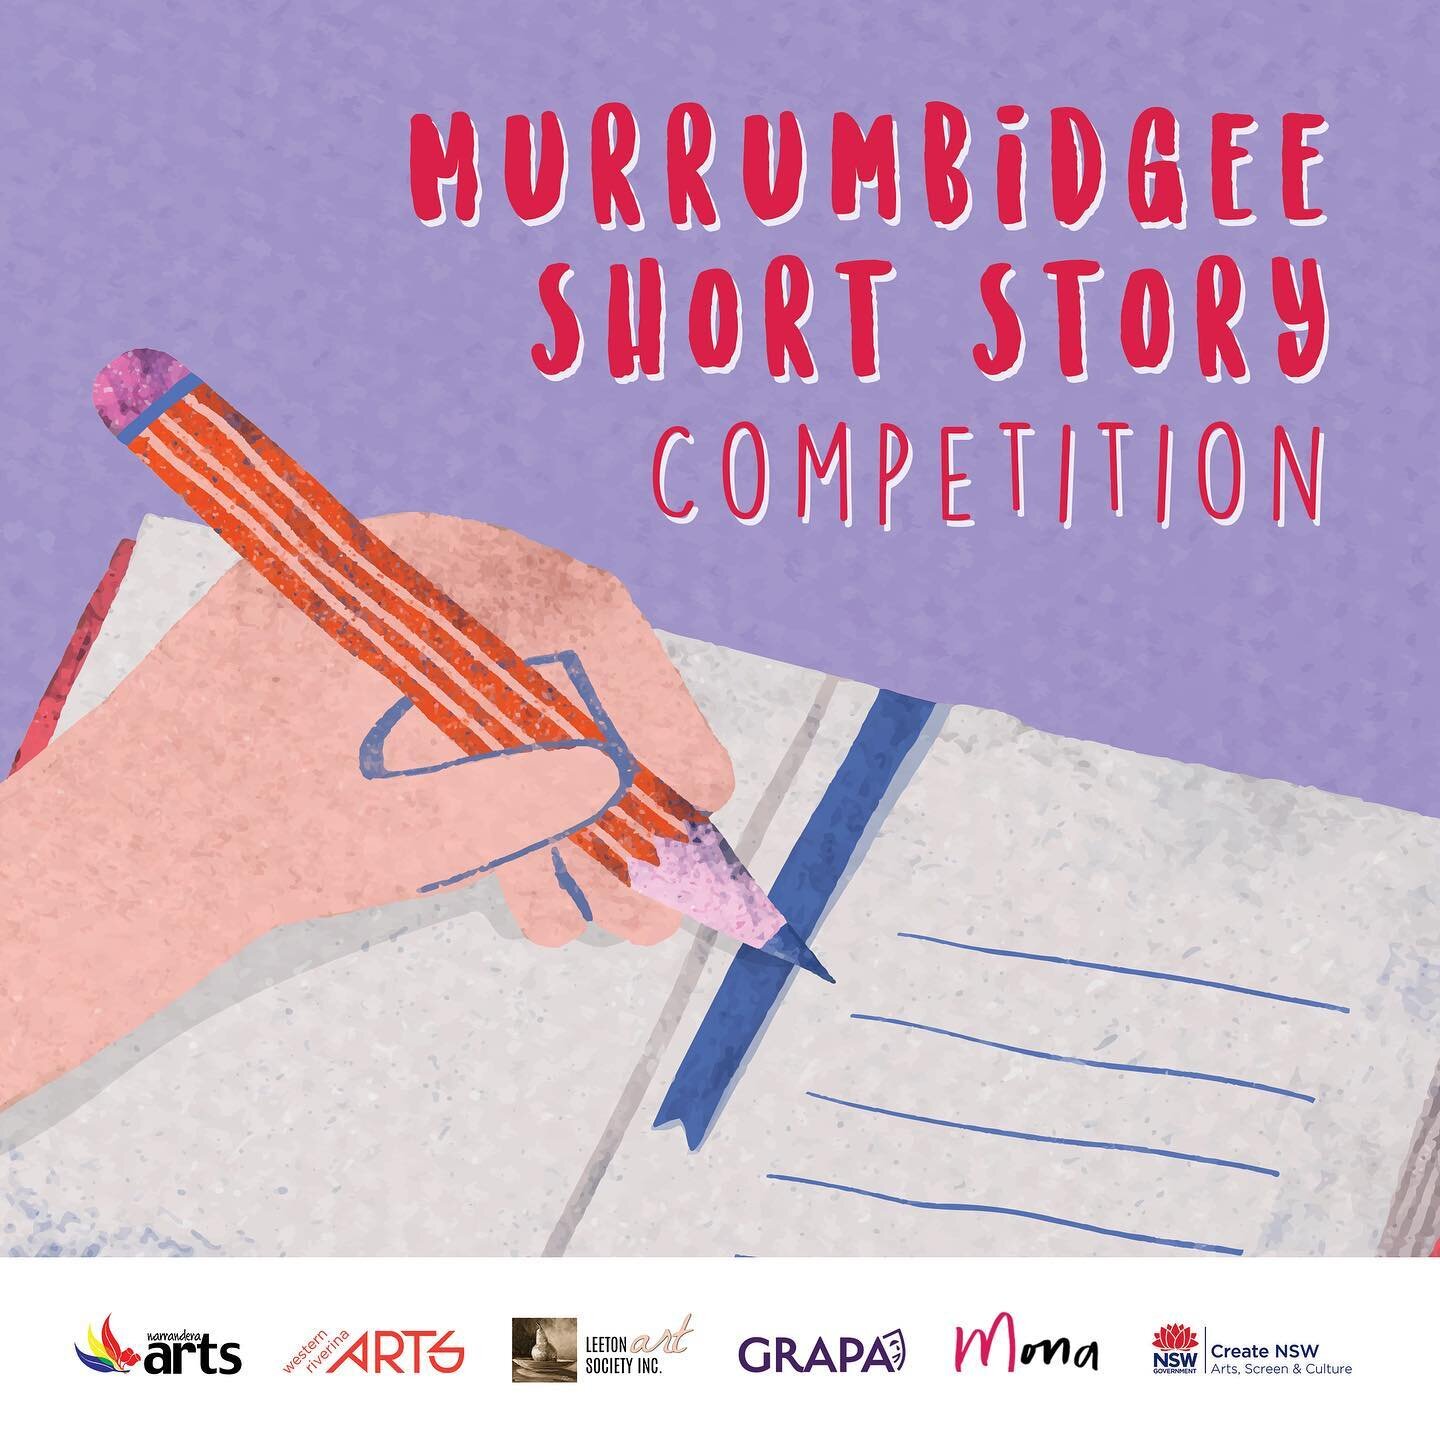 🎉📝 Congratulations to all the Winners and Highly Commended in the 2023 Murrumbidgee Short Story Competition. Thank you to all of the authors who entered the competition in this its third year. 

The judges were very impressed with the quality of th